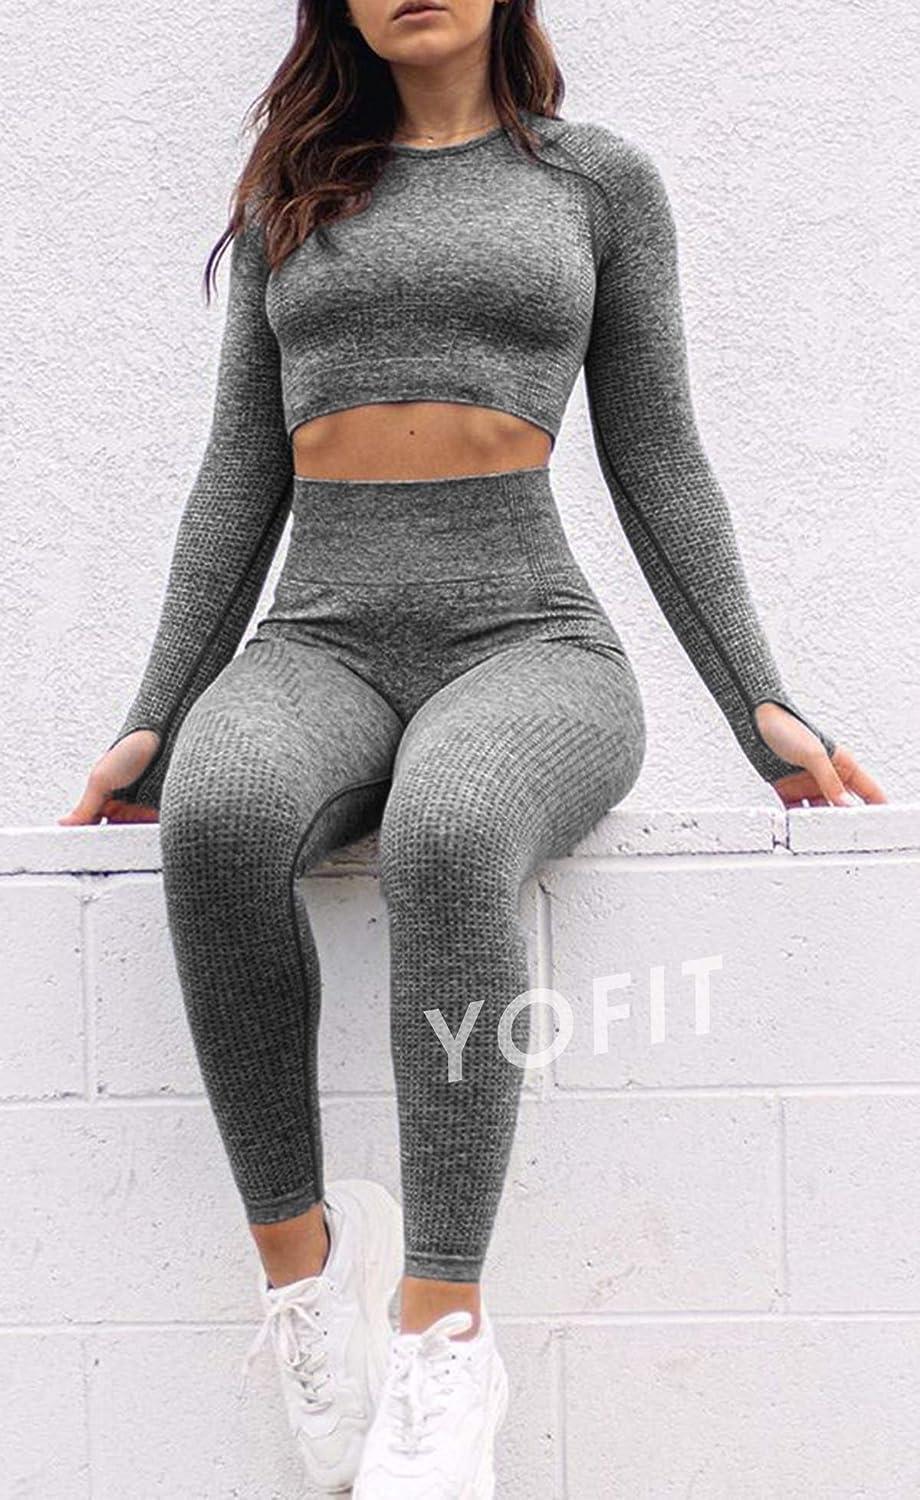 Workout Sets for Women Seamless 2 Piece Outfits Long Sleeve Sports Crop Top  Matching Leggings Yoga Gym Activewear 